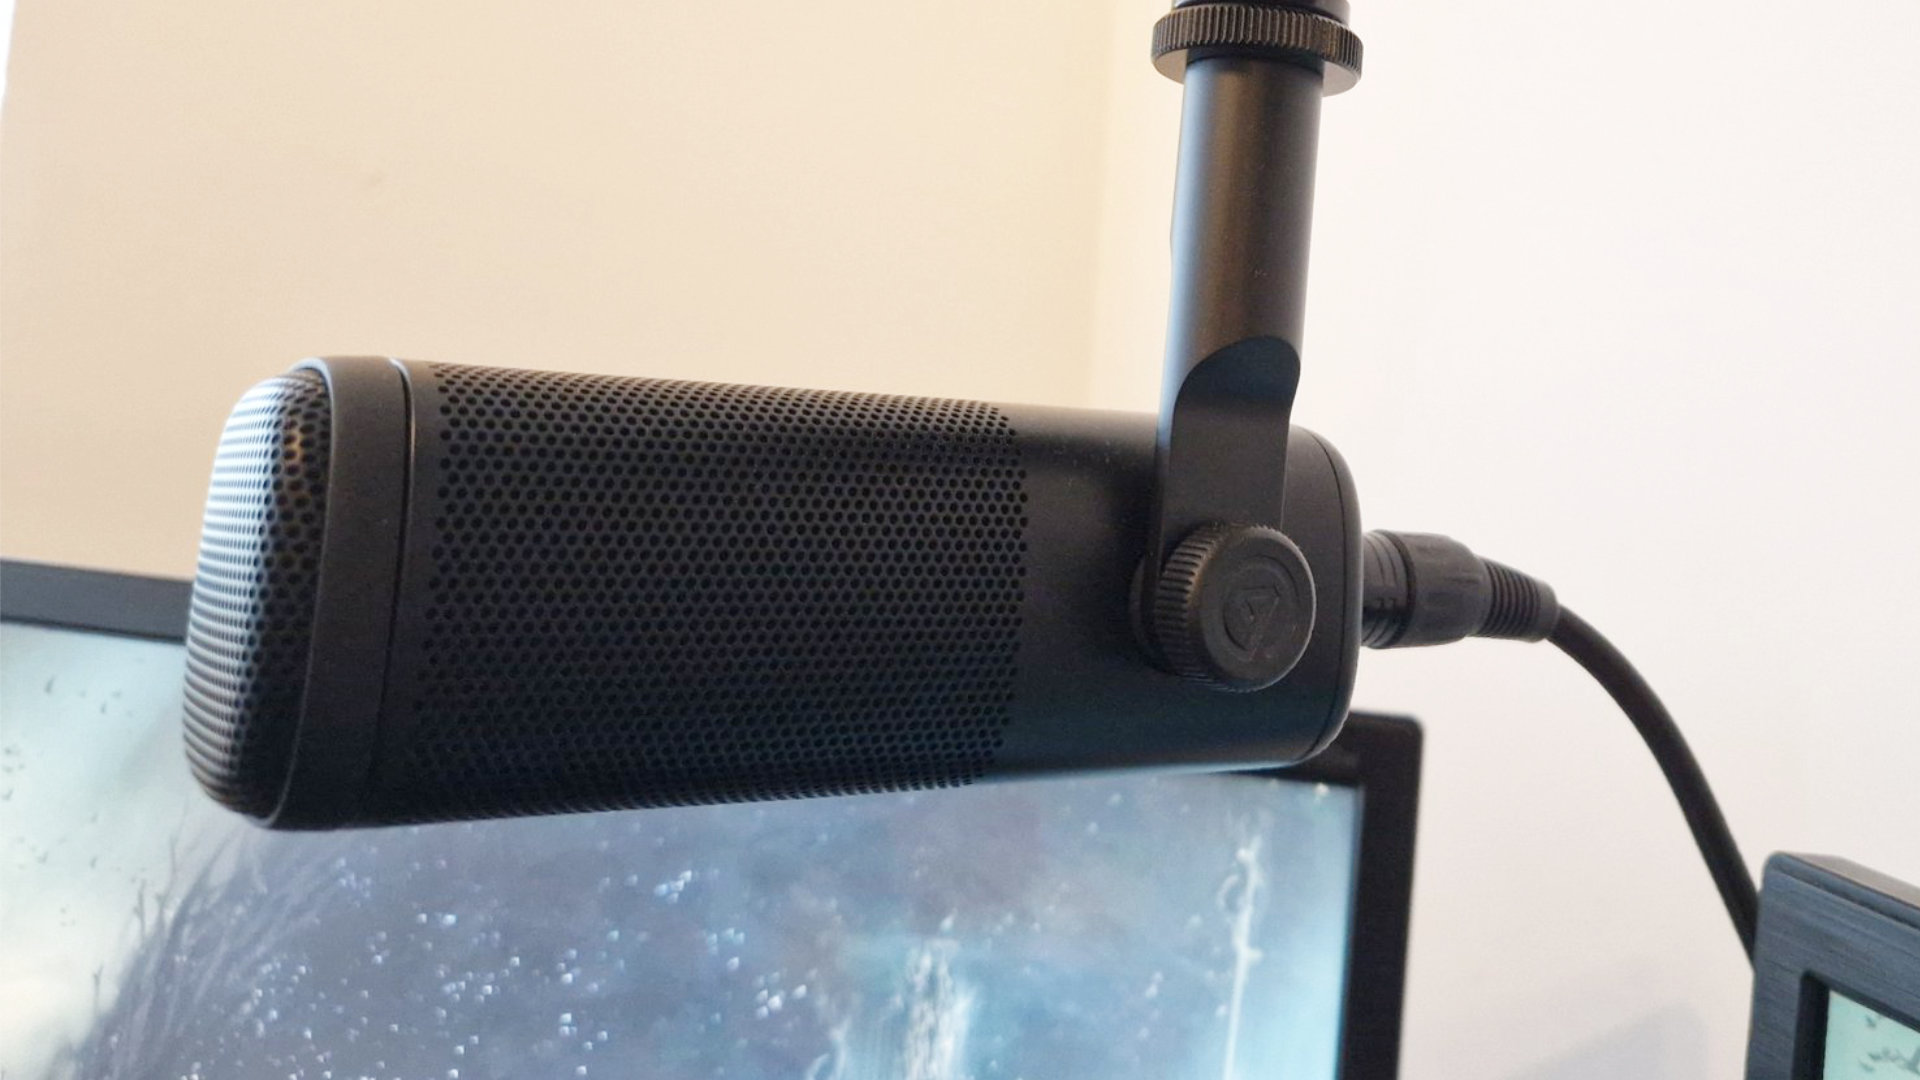 Elgato Wave DX review: An excellent choice for streamers looking for a  high-quality dynamic XLR microphone